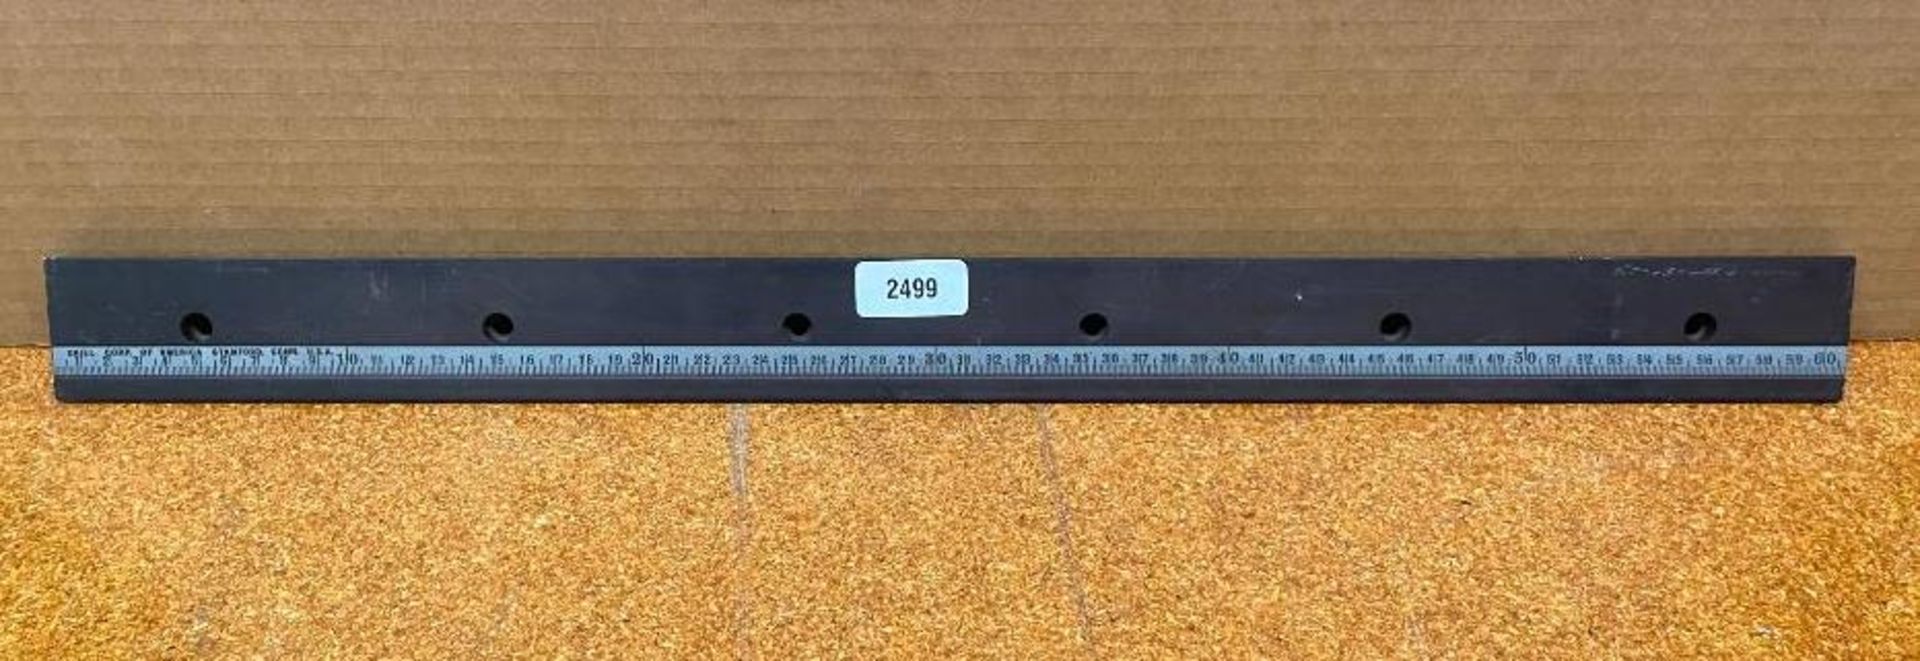 OPTICAL RAIL WITH RULER BRAND/MODEL: ORIEL INFORMATION: 60cm LONG, 5-COUNTERSUNK HOLES QTY: 1 - Image 2 of 4